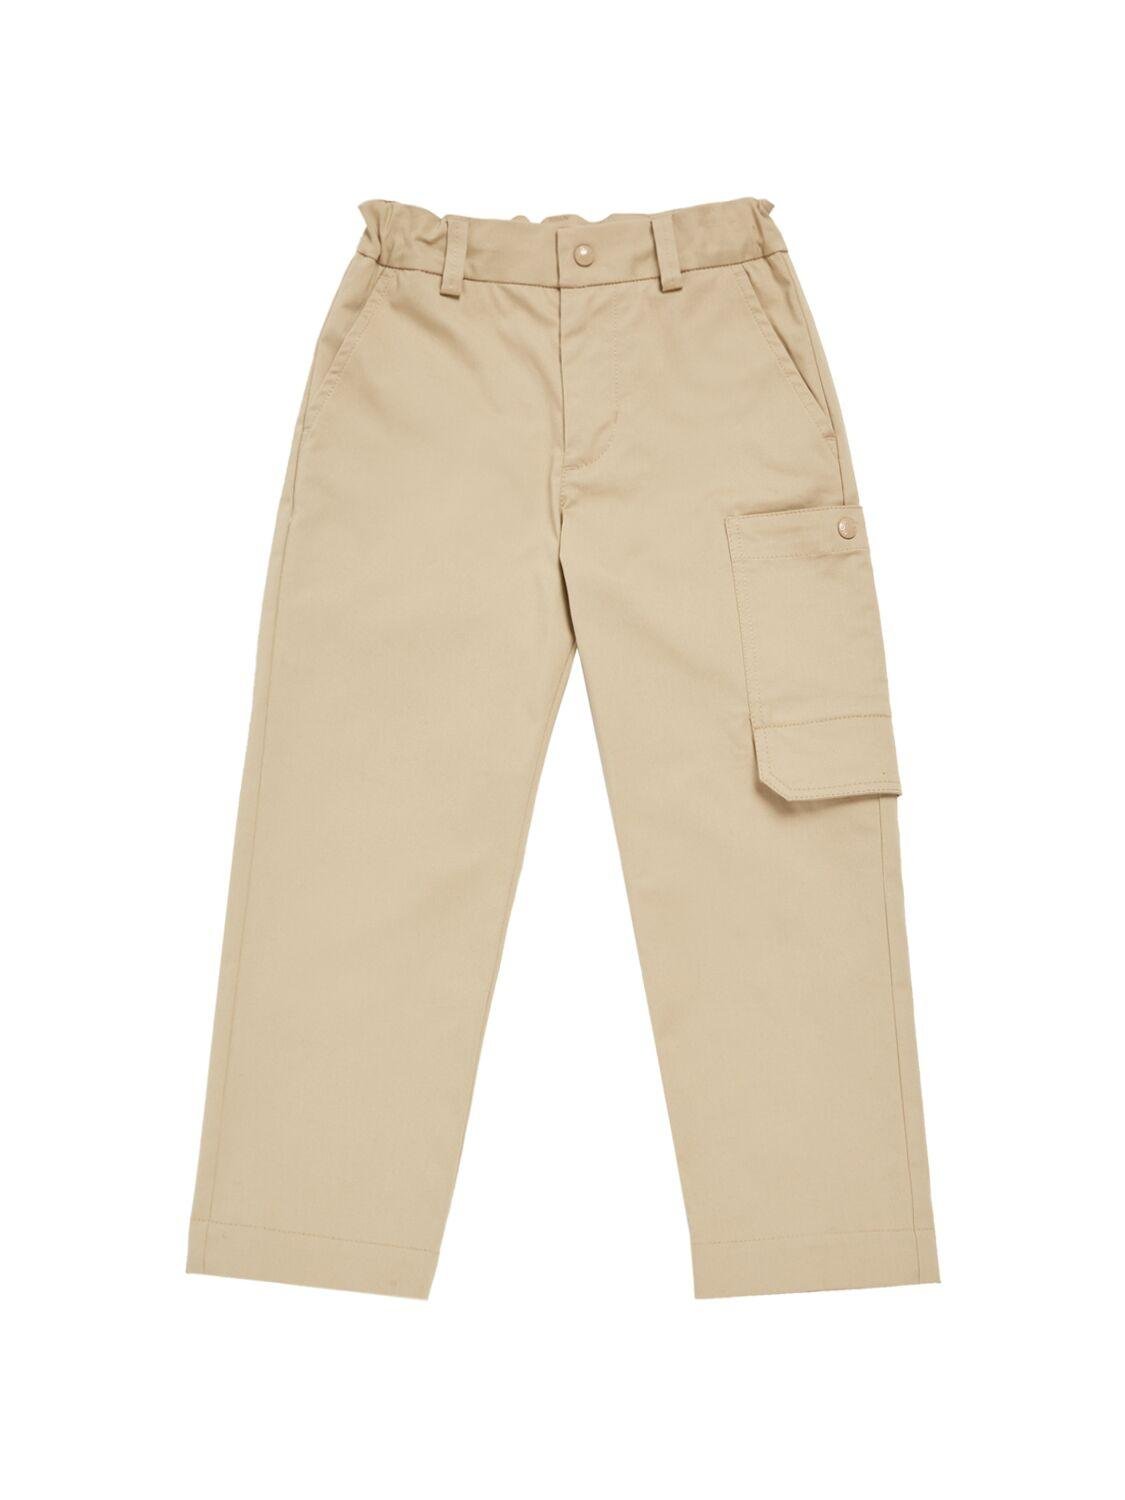 Cotton Stretch Twill Pants by MONCLER